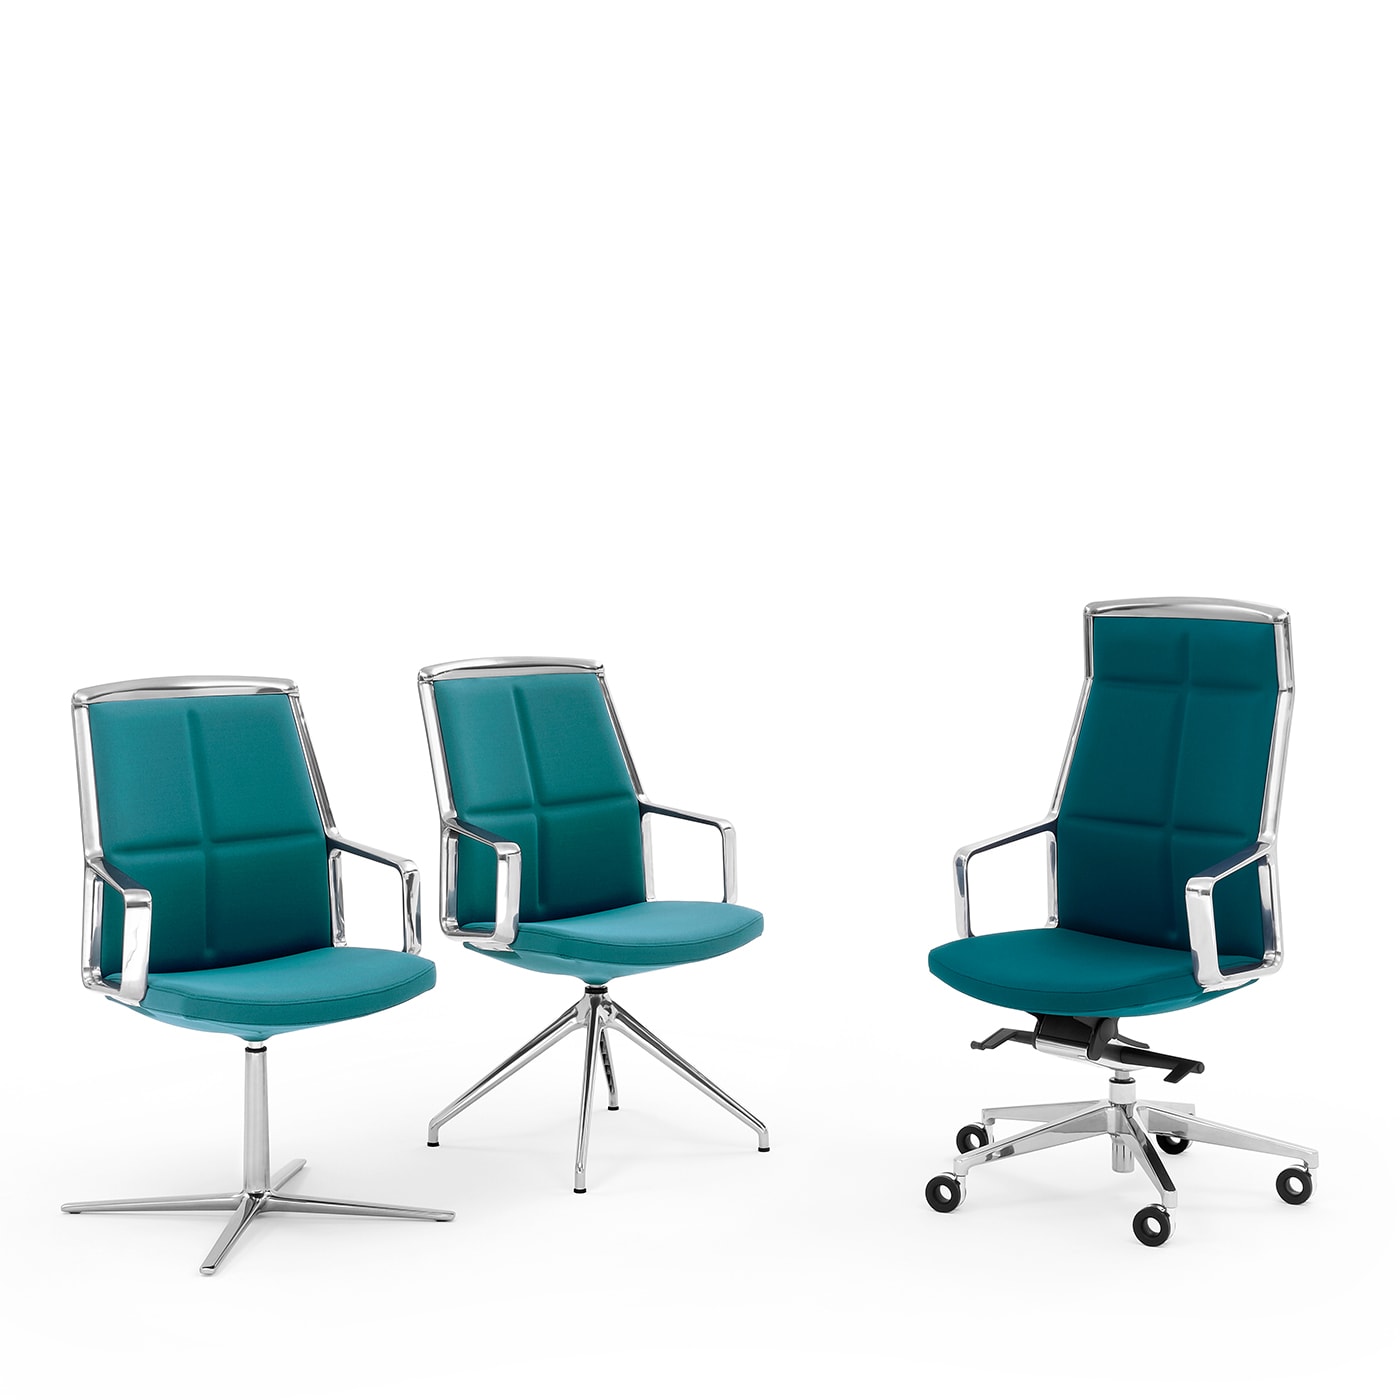 ADELE BLUE-GREEN MEETING CHAIR #1 by ORLANDINIDESIGN - Viganò & C.